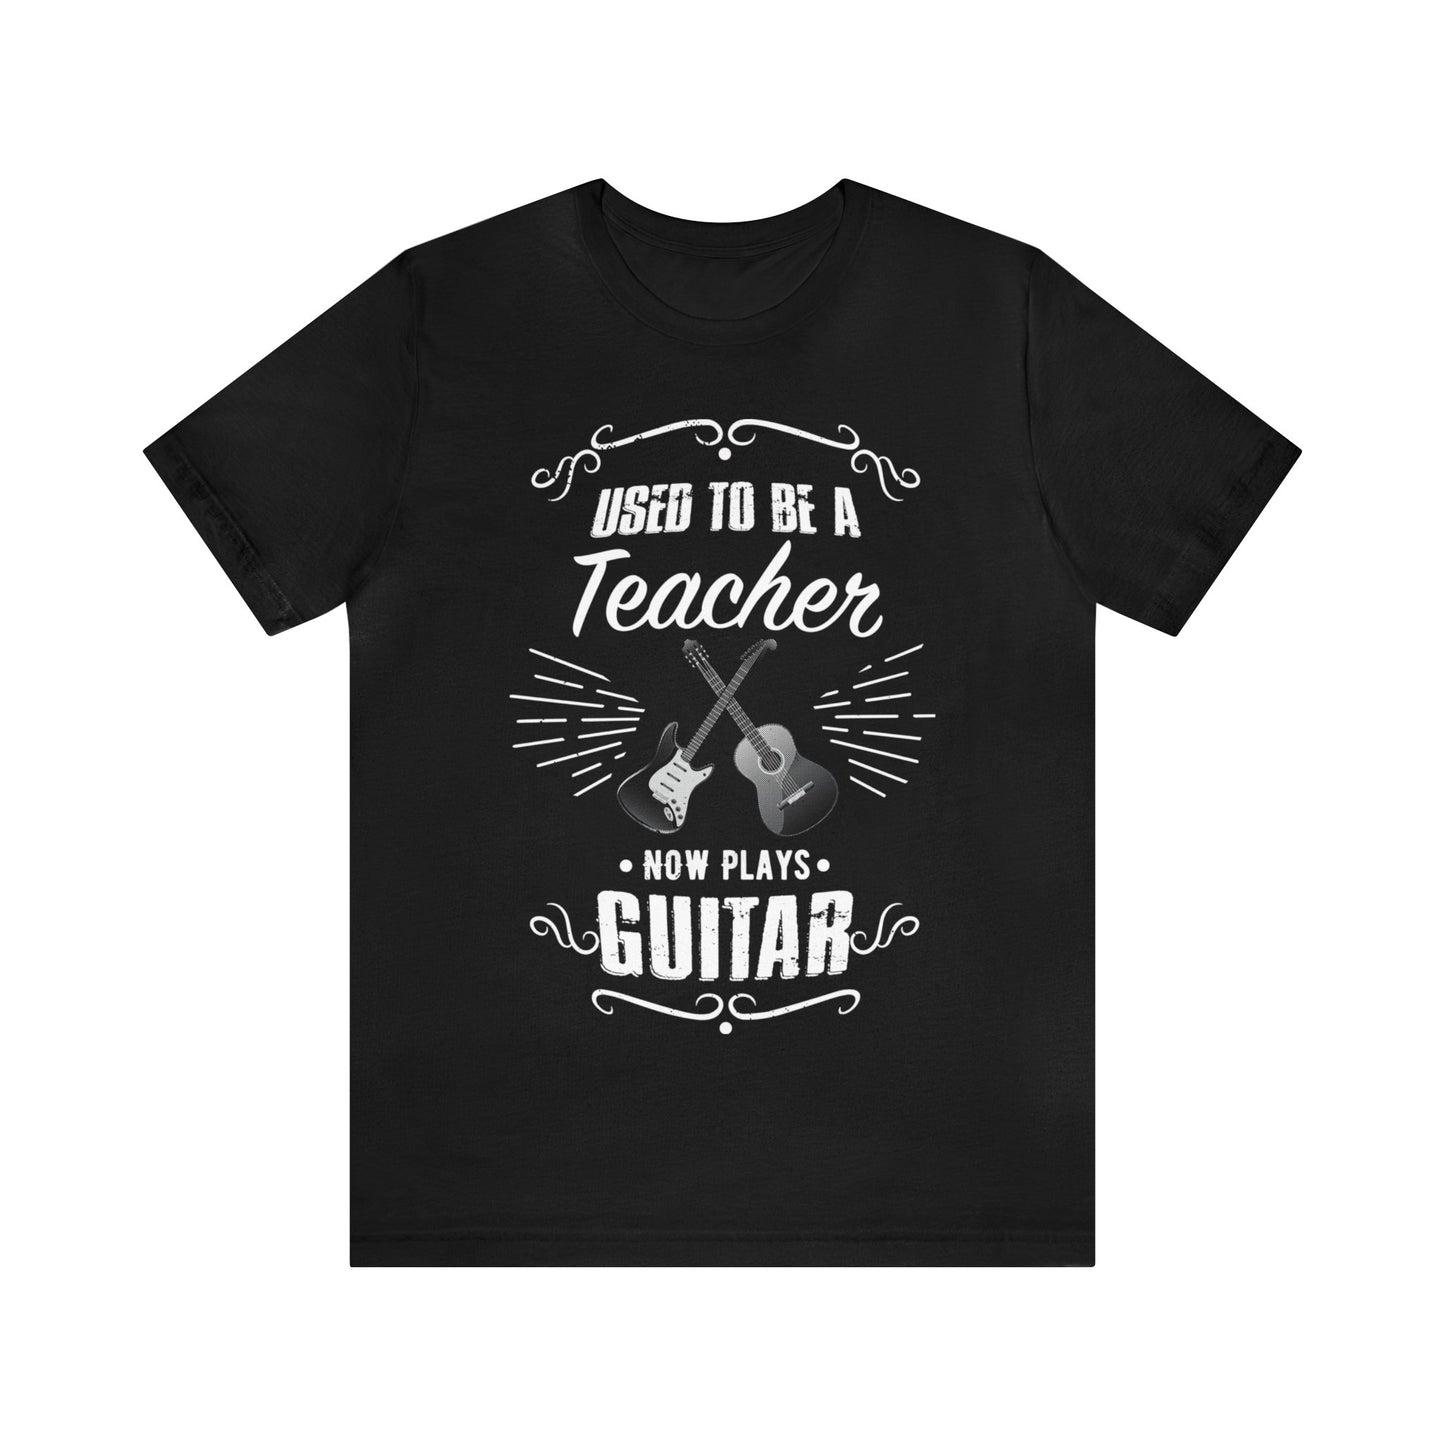 Used to be a TEACHER; Now Plays GUITAR - Funny Retirement Gift, Unisex T-shirt Bella+Canvas 3001, dark shirt colors for amateur musician/guitar player